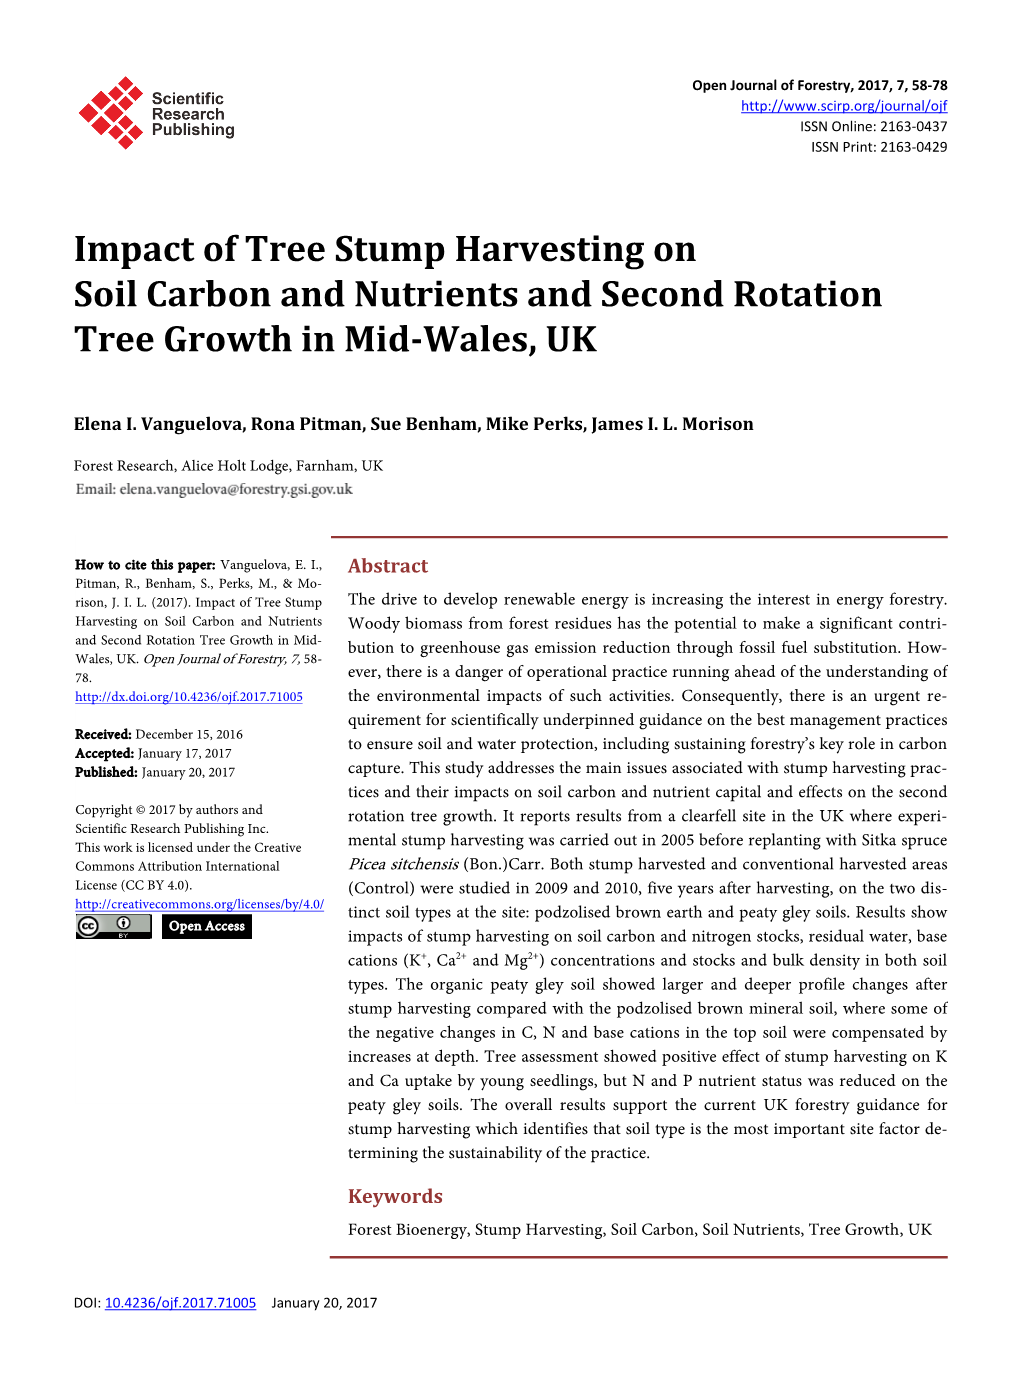 Impact of Tree Stump Harvesting on Soil Carbon and Nutrients and Second Rotation Tree Growth in Mid-Wales, UK